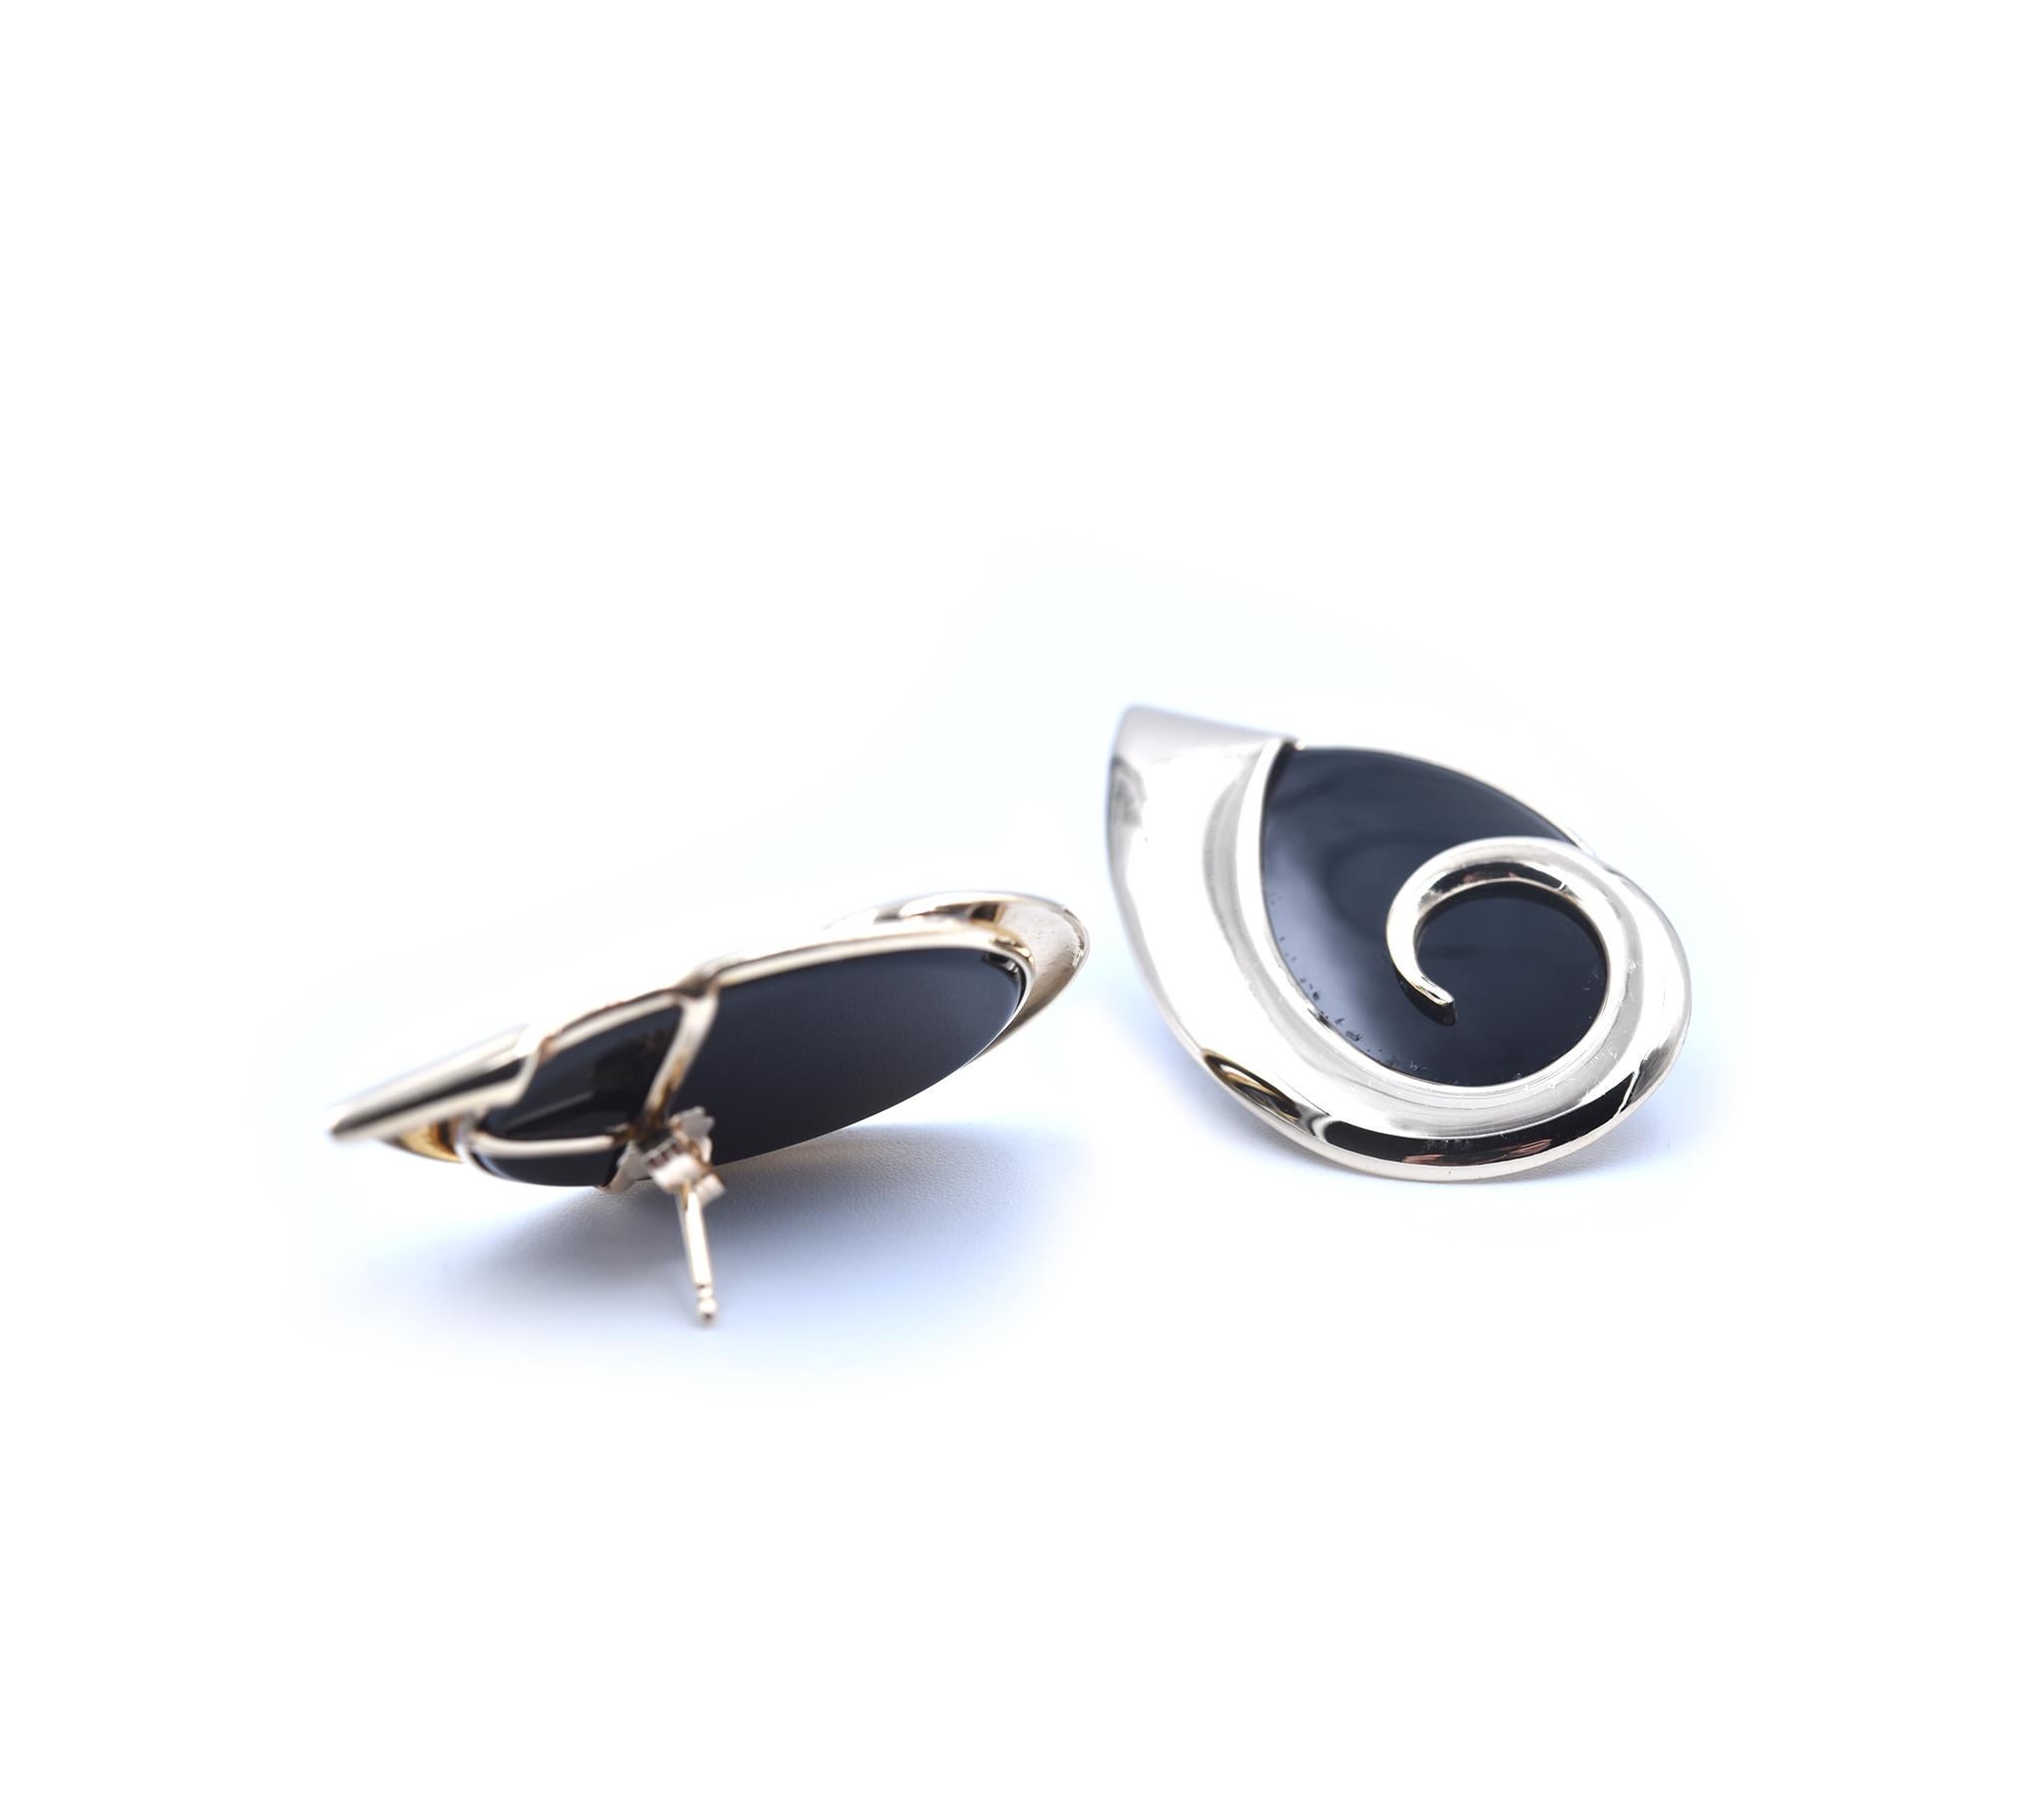 Designer: custom 
Material: 14k yellow gold
Onyx: 2 custom cut onyx
Dimensions: earrings measure 20.80mm x 35.45mm
Fastenings: post with friction backs
Weight: 8.27 grams
